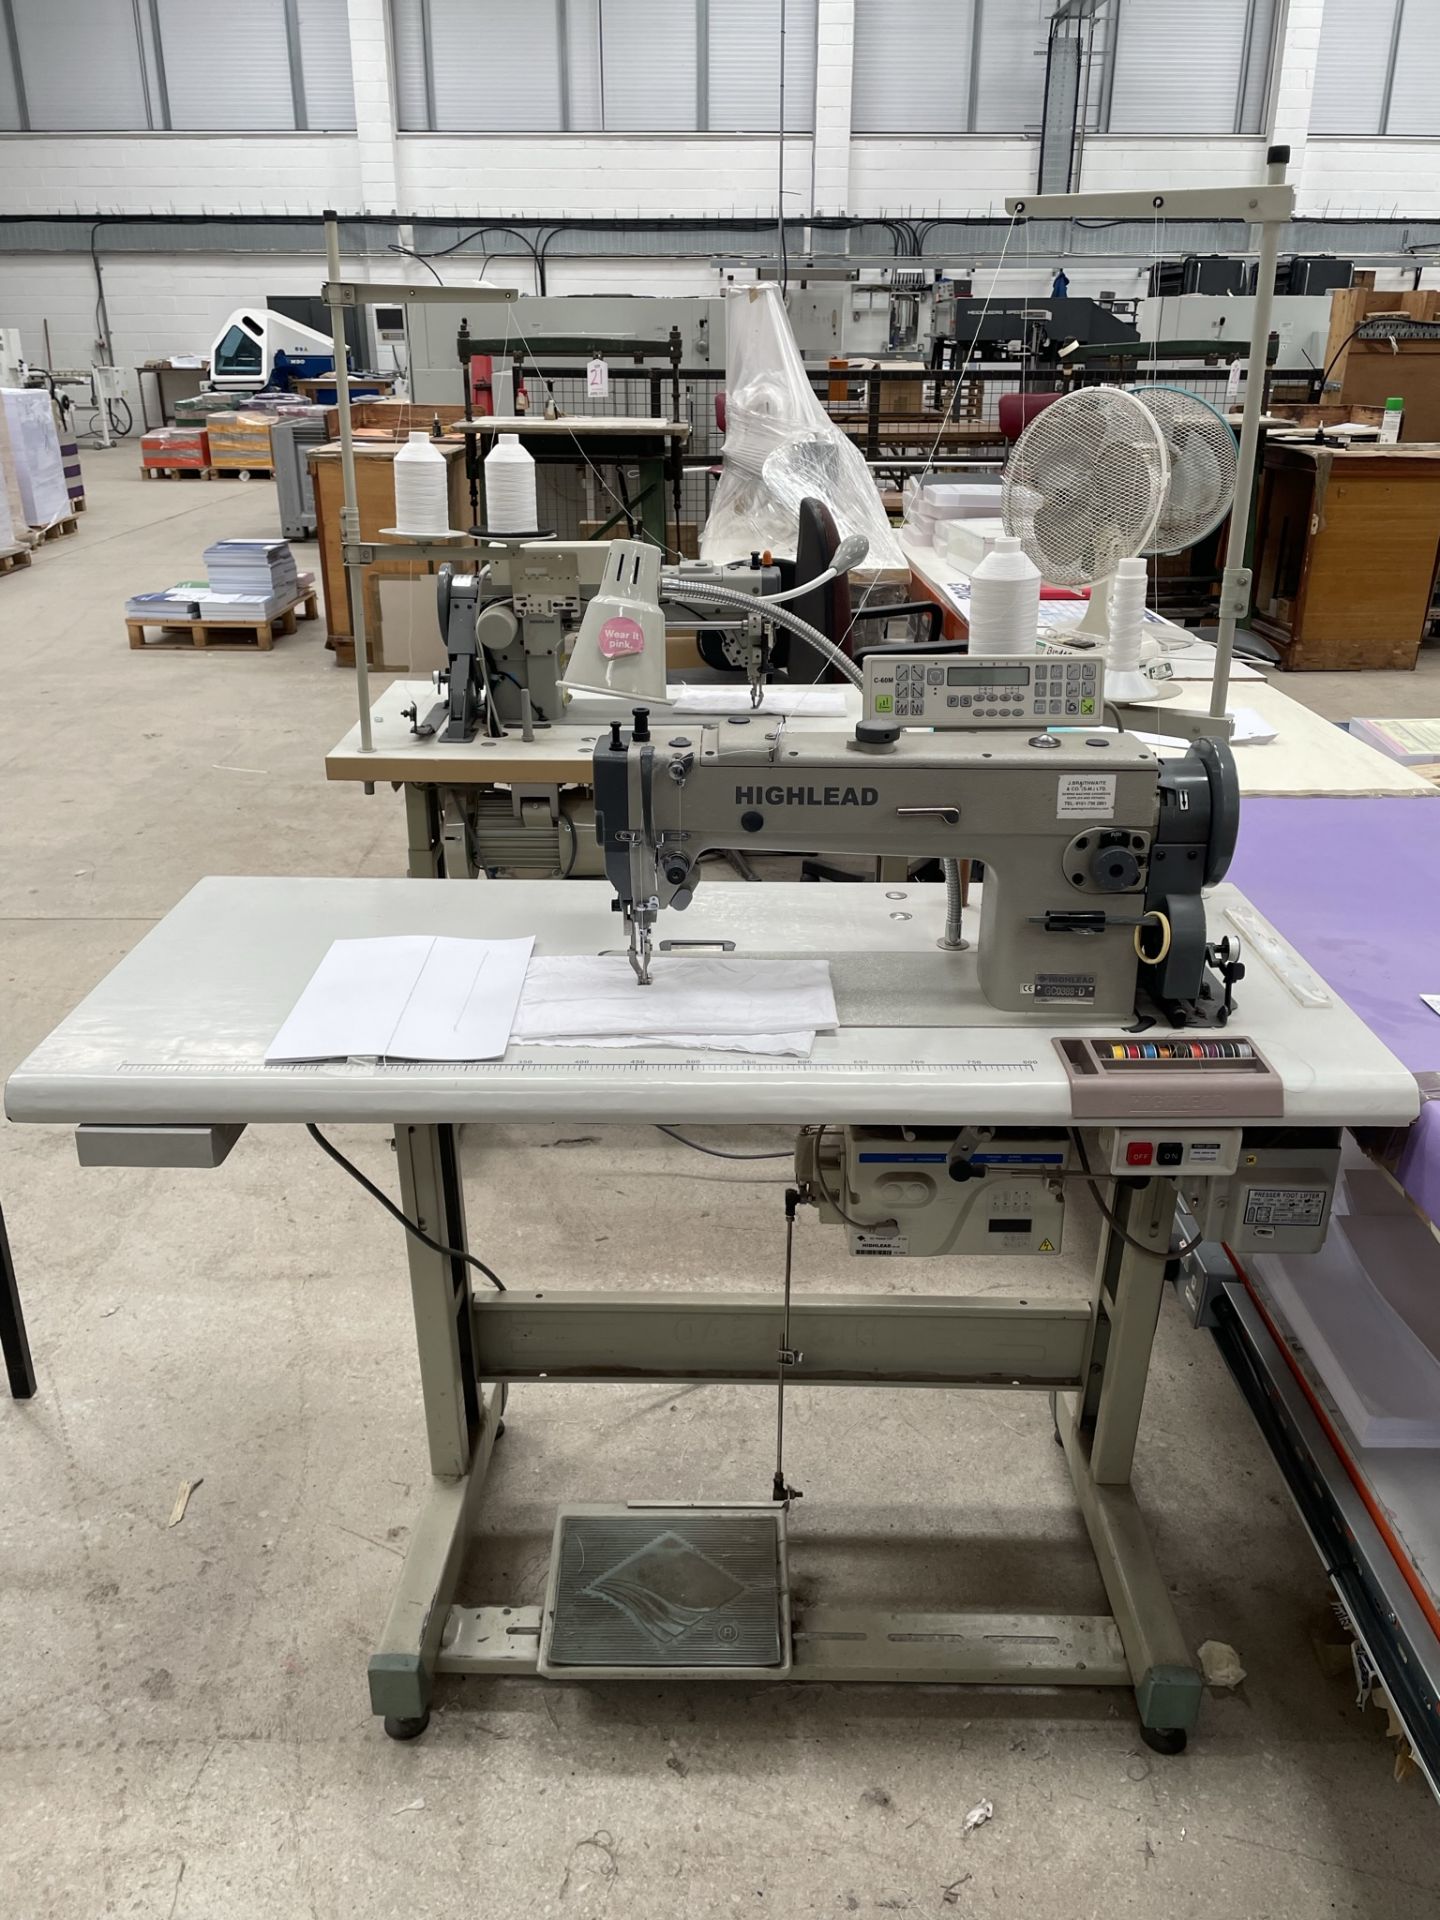 Highlead GC0388-DIndustrial Flat Bed Sewing Machine